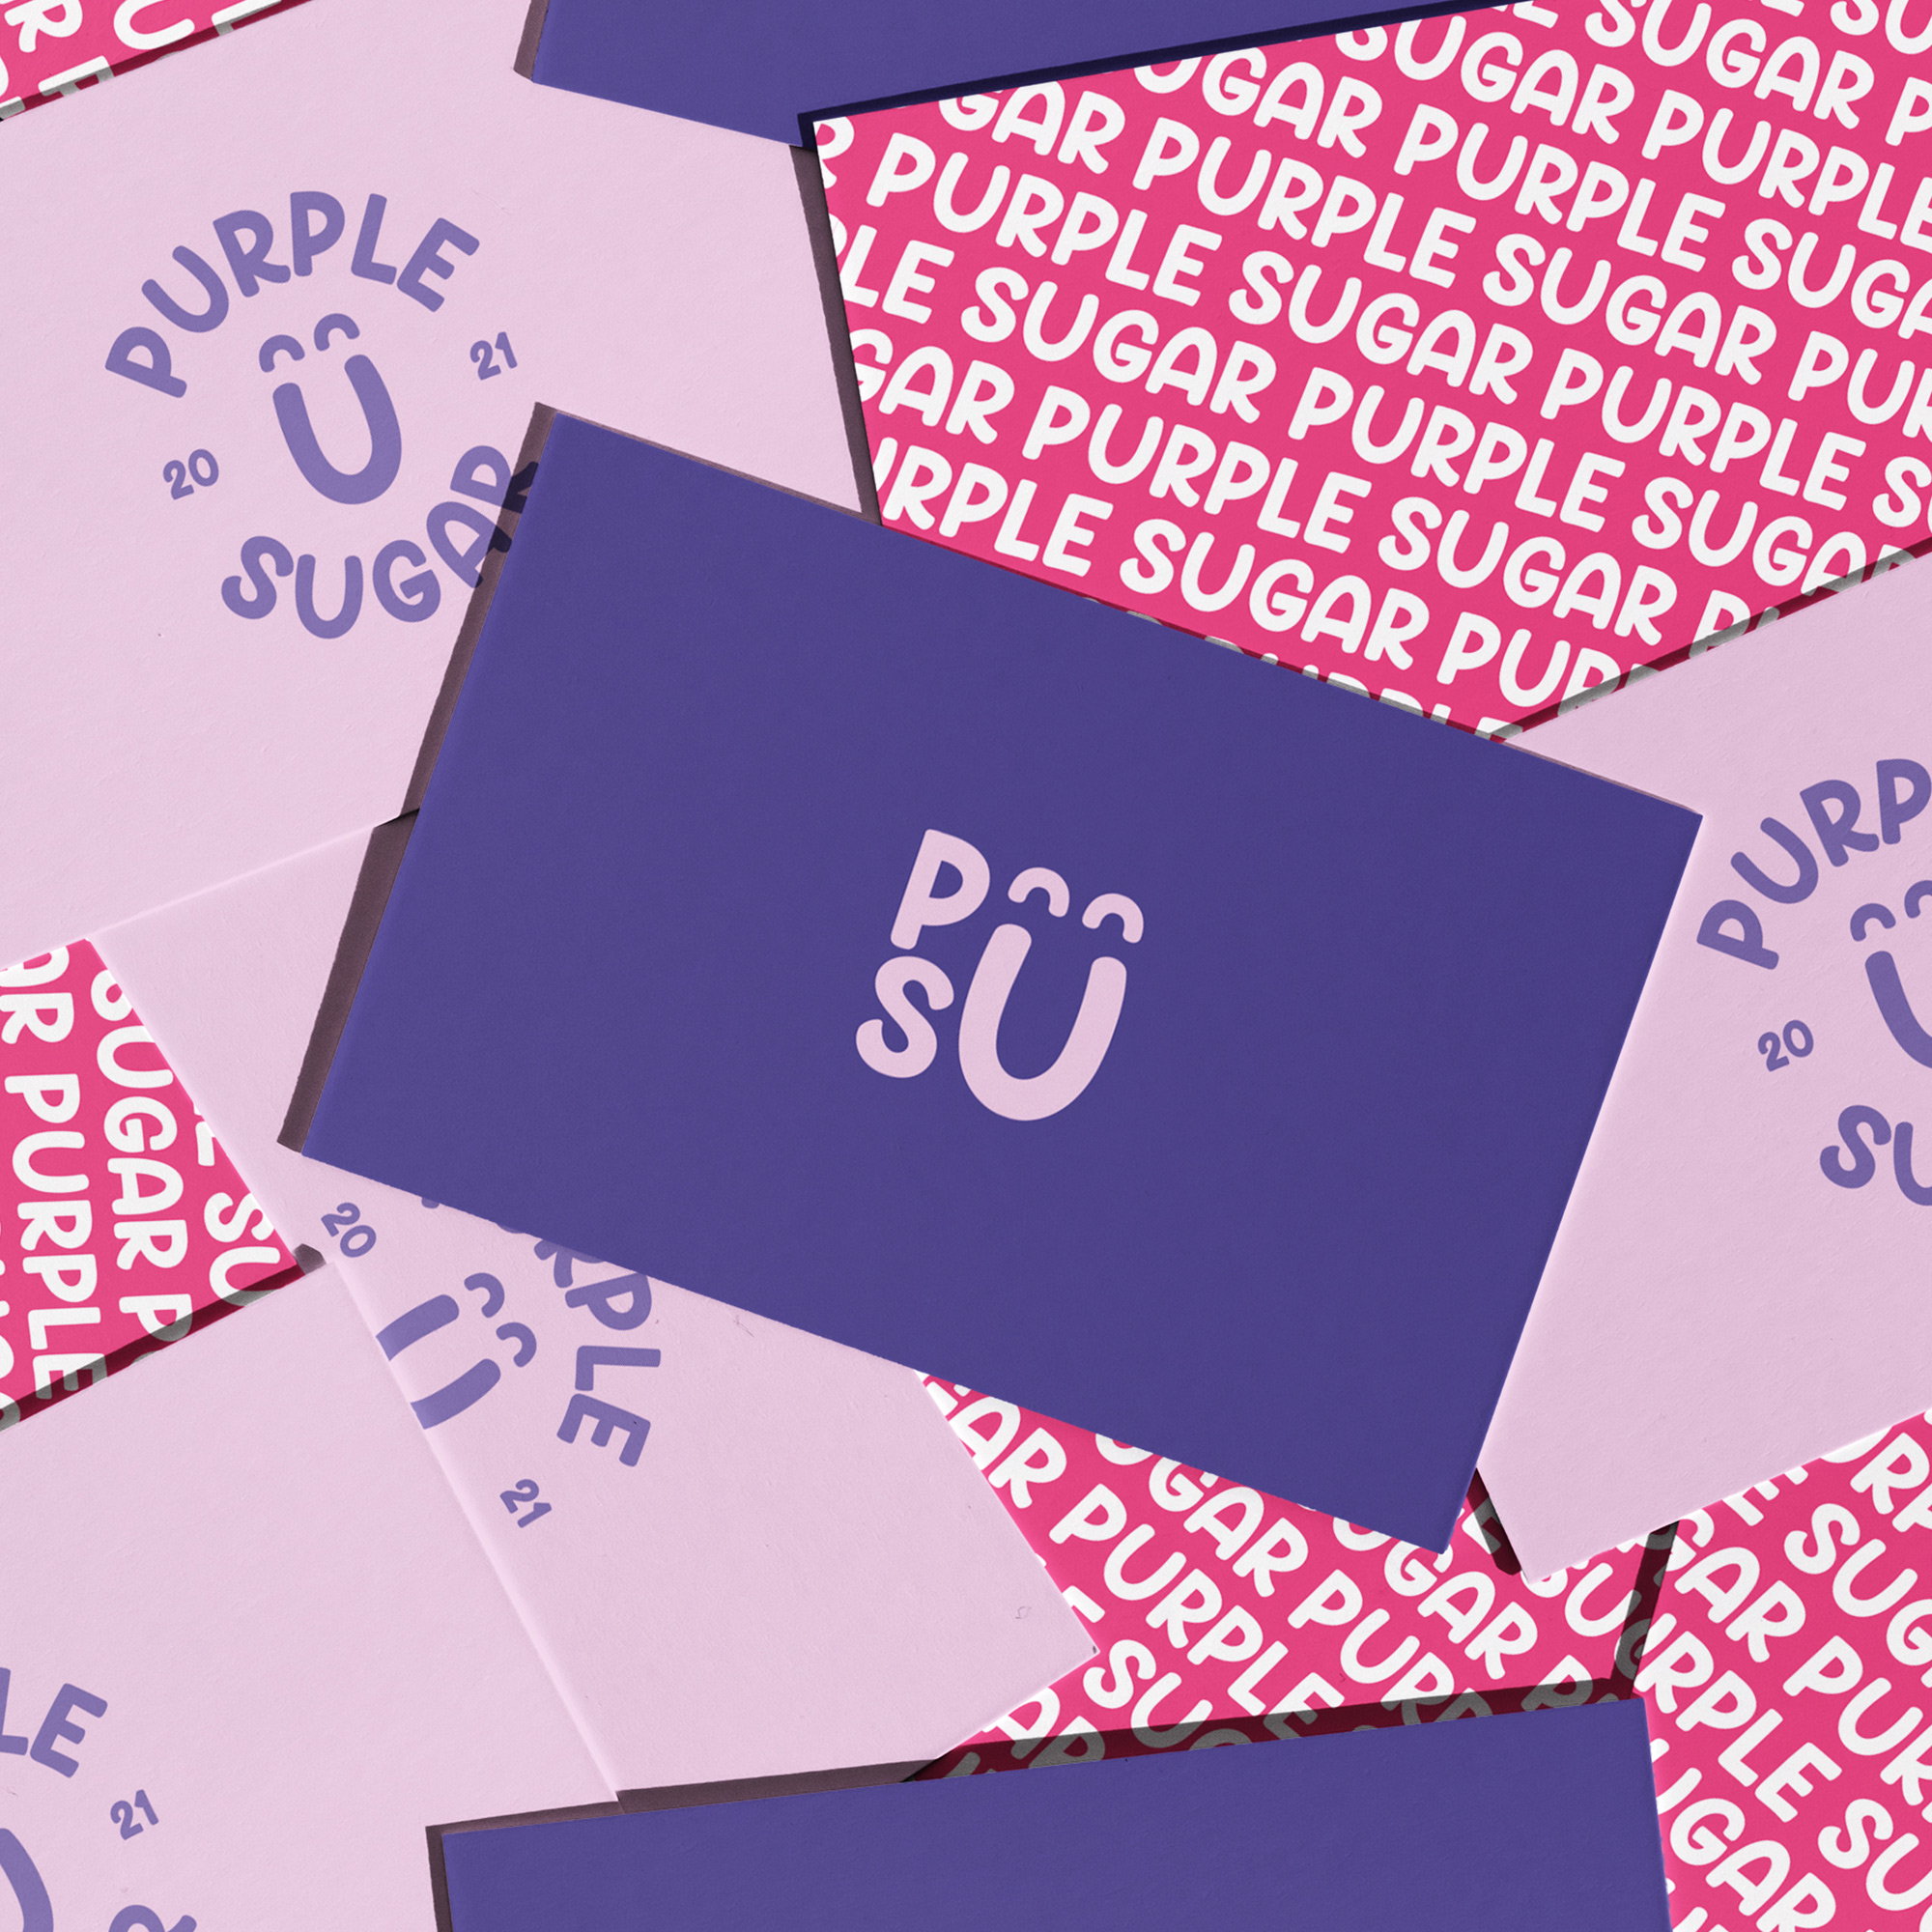 Logo, Identity and Packaging Design for PurpleSugar Candy Store in Benghazi